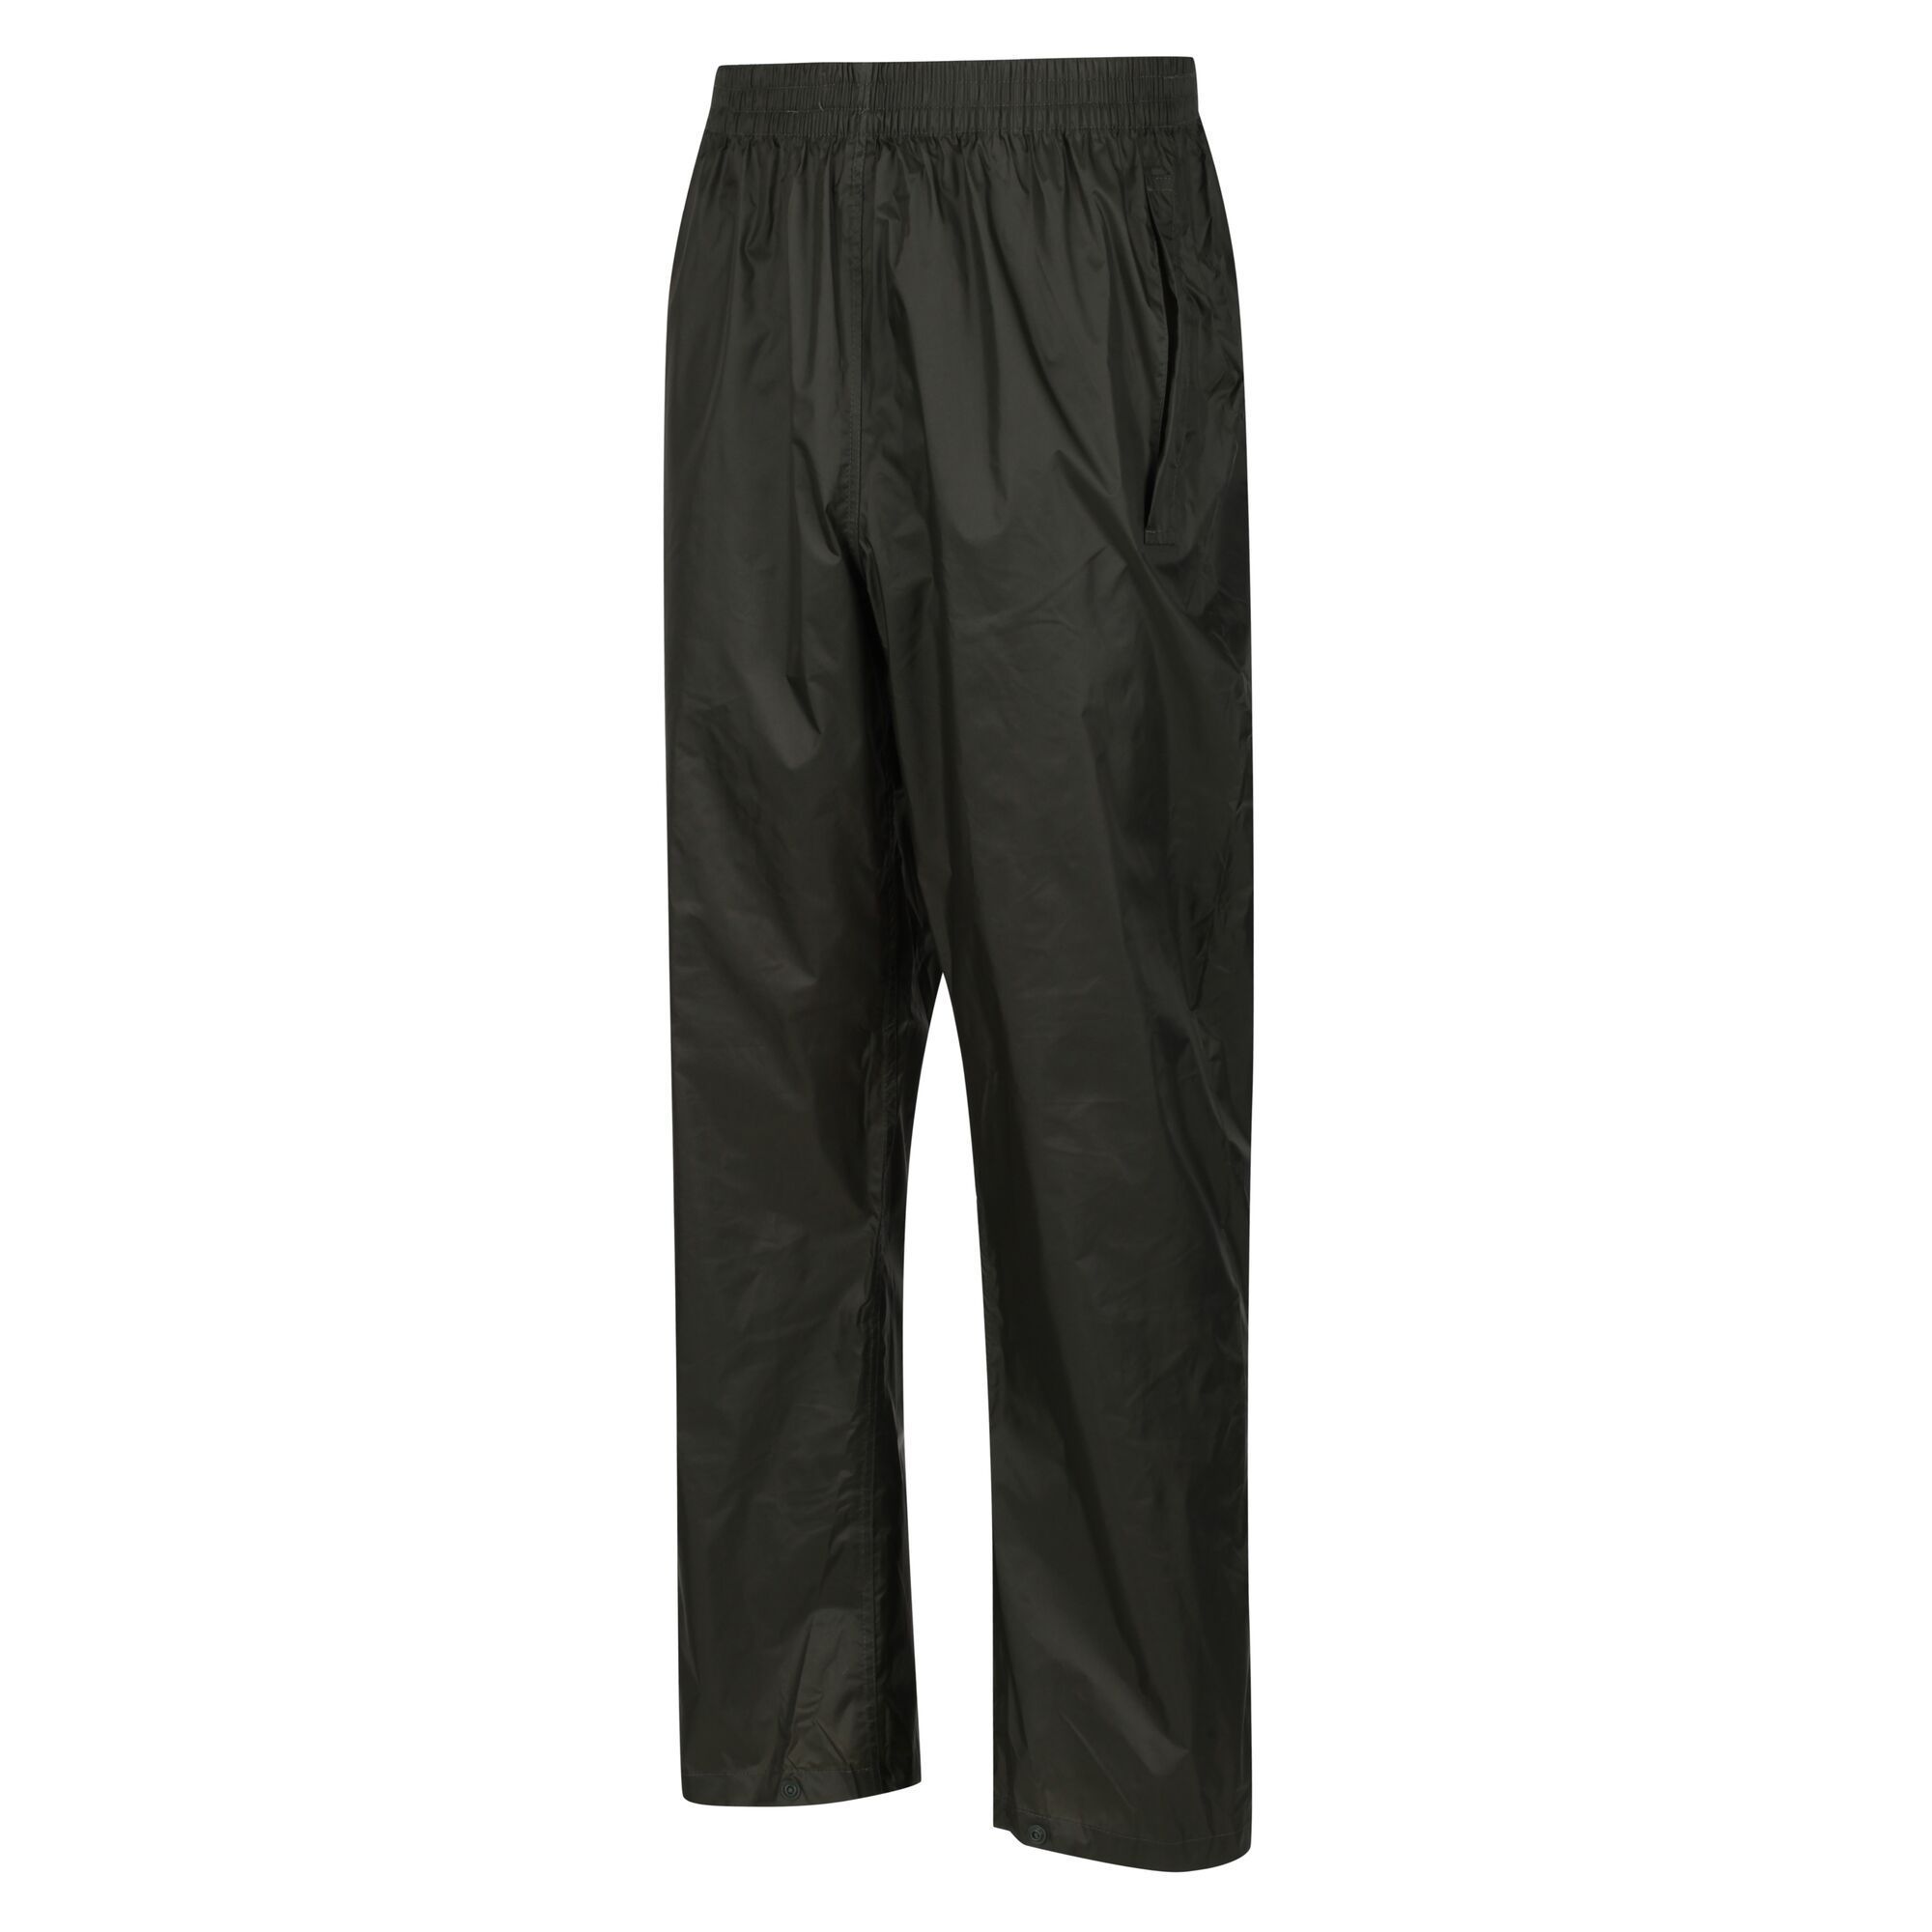 The mens Pack-it is an unlined packable overtrouser. Its your emergency wet-weather trouser built on over 30 years experience in outdoors clothing. Made from Isolite fabric technology to provide lightweight, waterproof, breathable and wind-resistant protection. Keep them in the handy stuff sack and stow them in daypacks, backpacks, car boots, desk drawers, kitchen cupboards, wherever suits. 100% Polyester. Regatta Mens Overtrousers Sizing (Waist Approx): XXS (26-28in/66-71cm), XS (28-30in/71-76cm), S (30-32in/76-81cm), M (33-34in/84-86cm), L (36-37in/92-94cm), XL (38-40in/97-102cm), XXL (42-44in/107-112cm), XXXL (46-48in/117-122cm), XXXXL (50-52in/127-132cm).